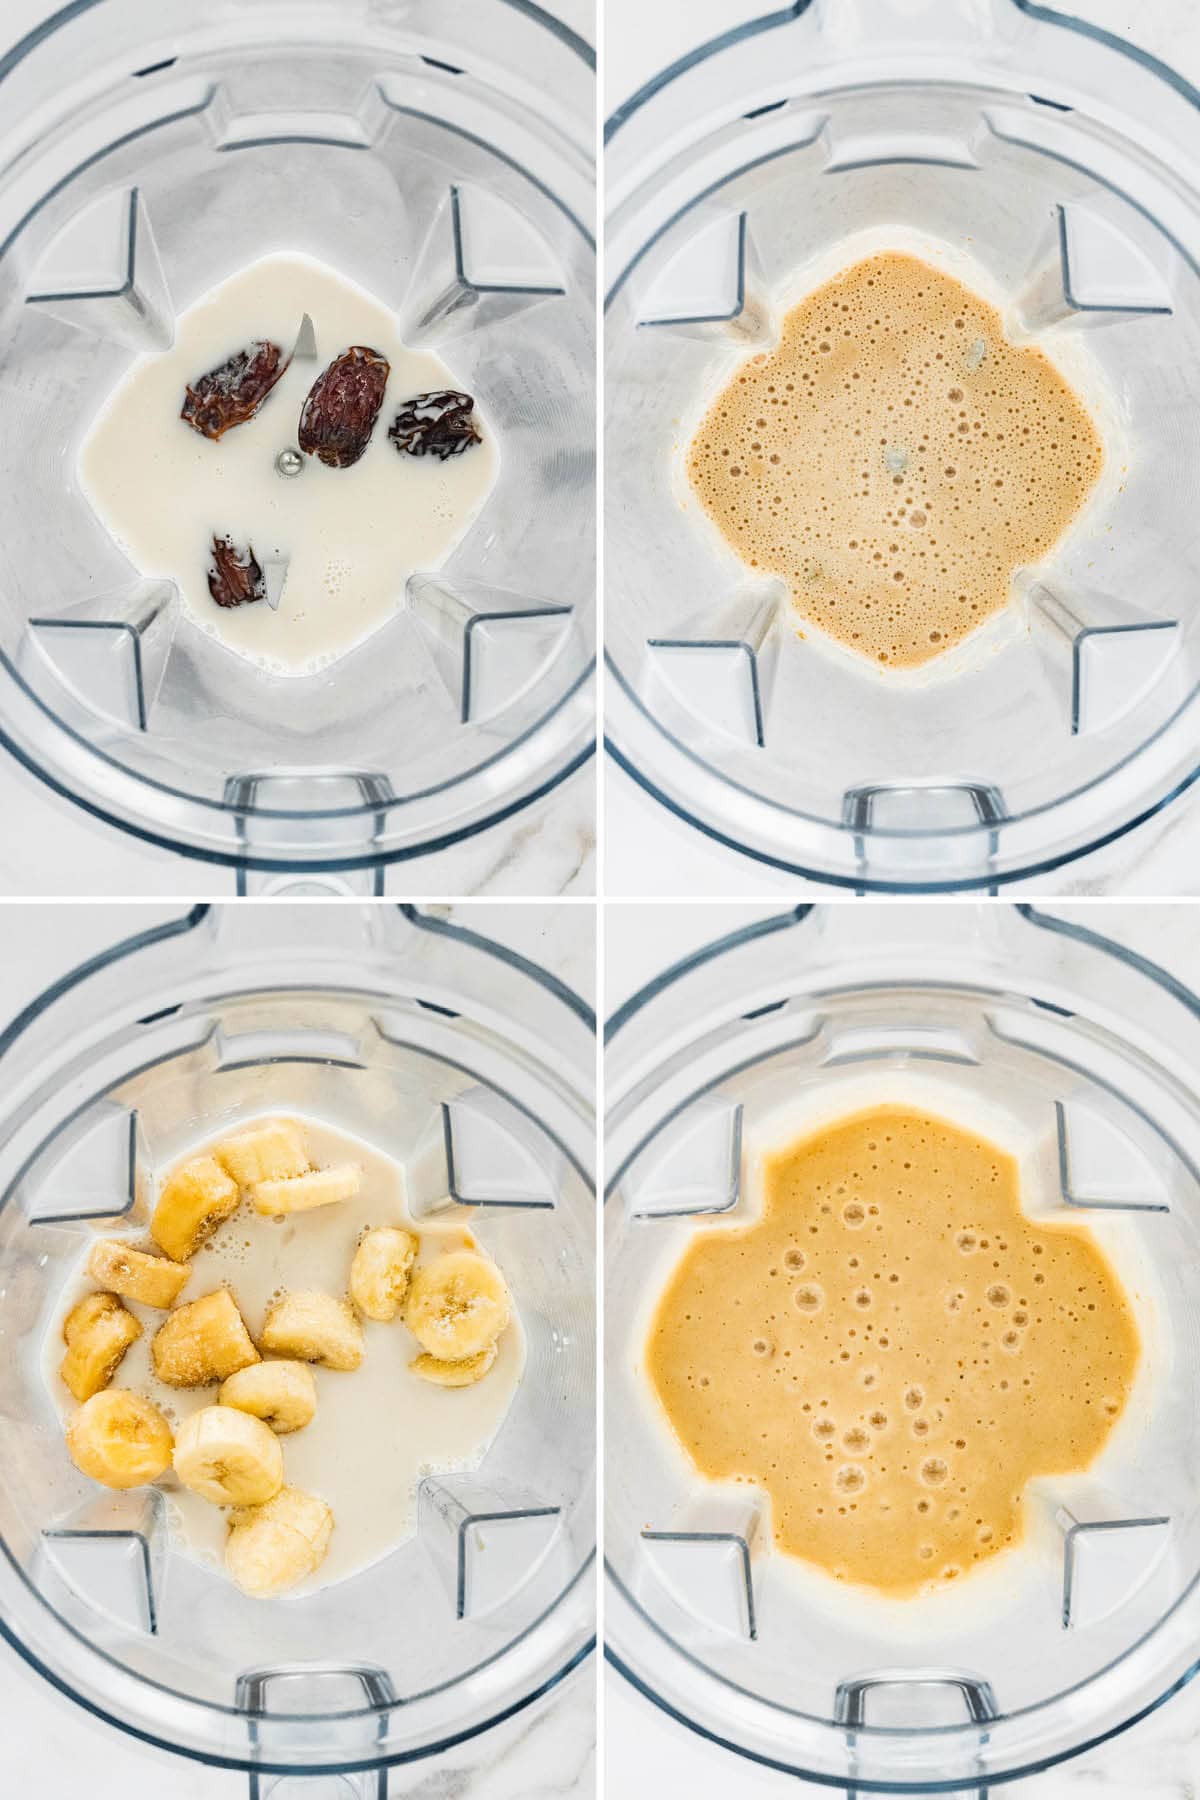 Collage of four photos showing how to make a Date Shake in a blender.